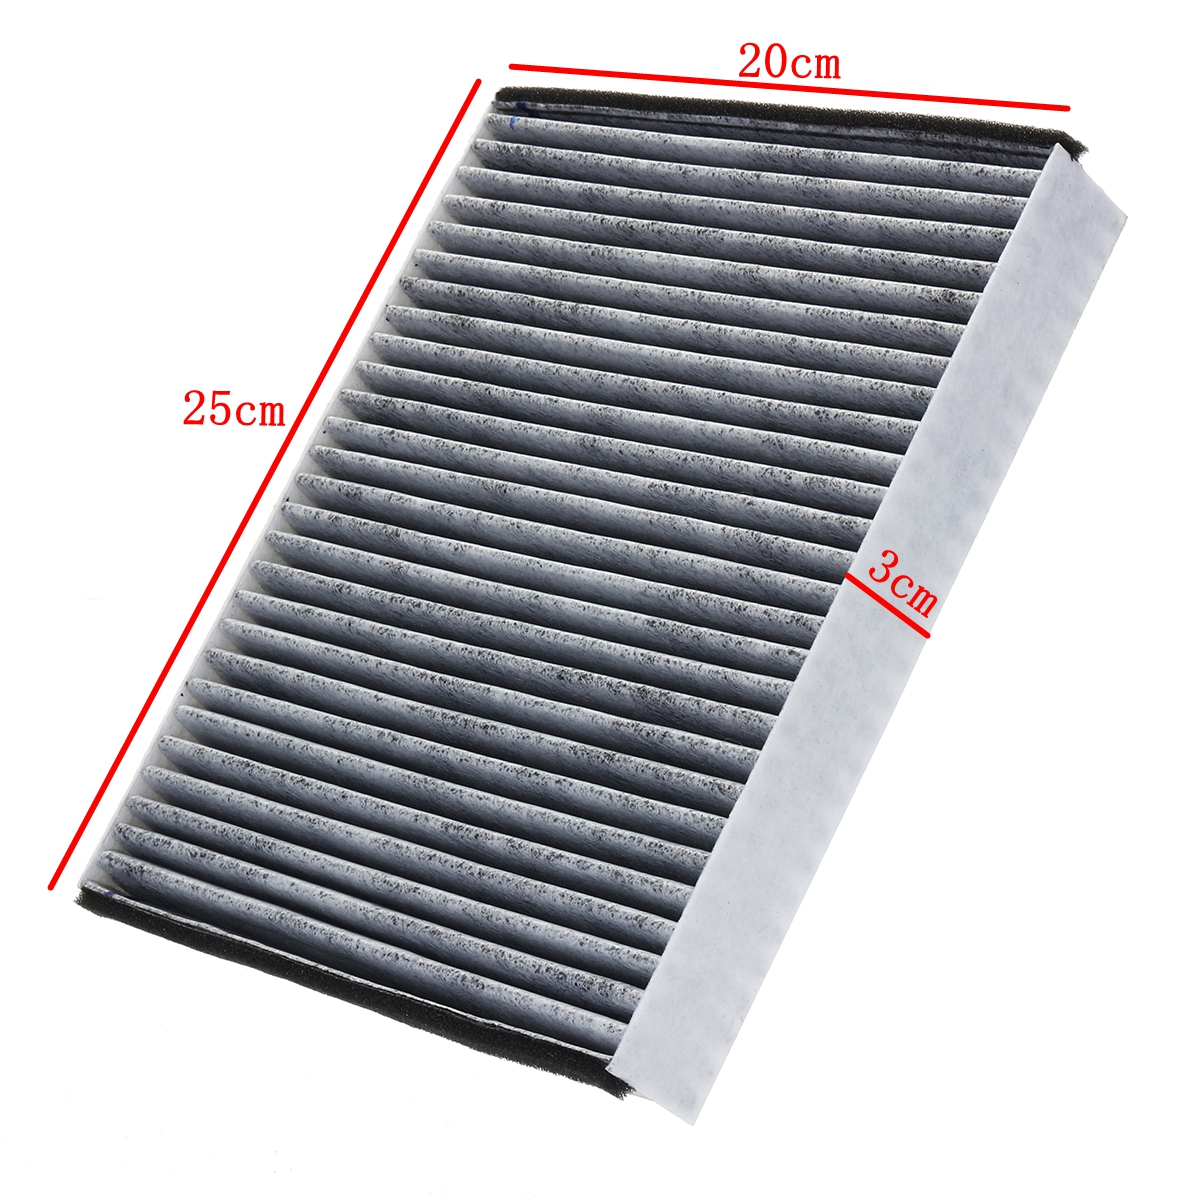 New Cabin Pollen Filter Element For Ford Focus S-Max Mondeo Kuga Galaxy #1315687 C40196C – Chile 2014 Ford Focus Cabin Air Filter Part Number